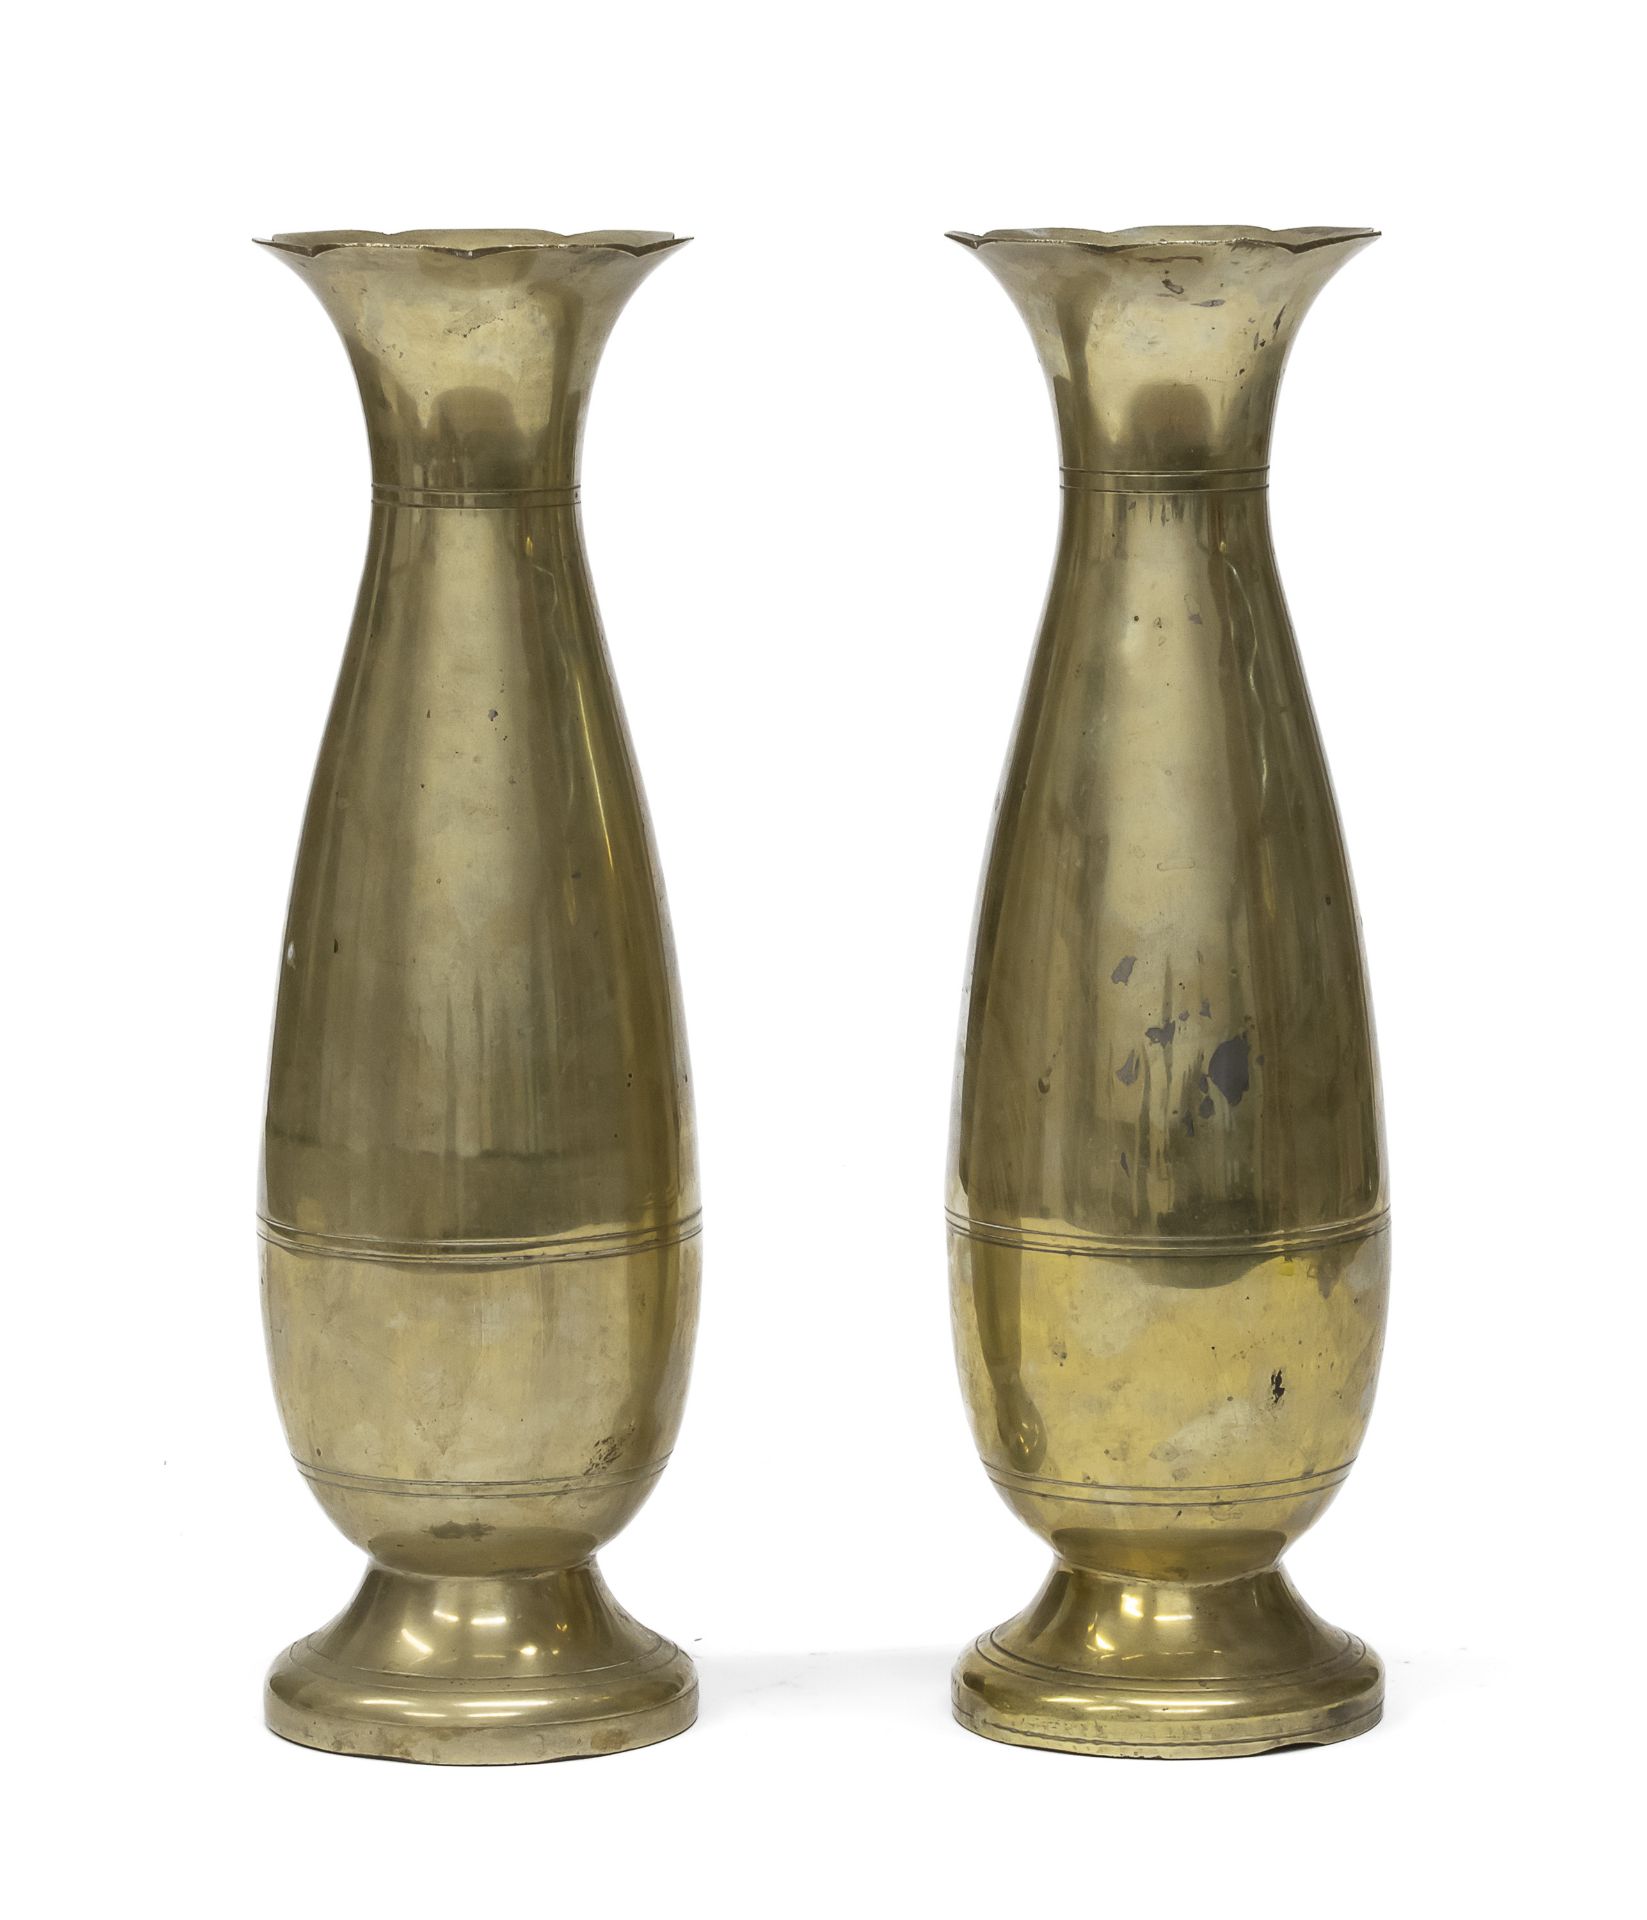 A PAIR OF CHINESE BRASS VASES. 20TH CENTURY.